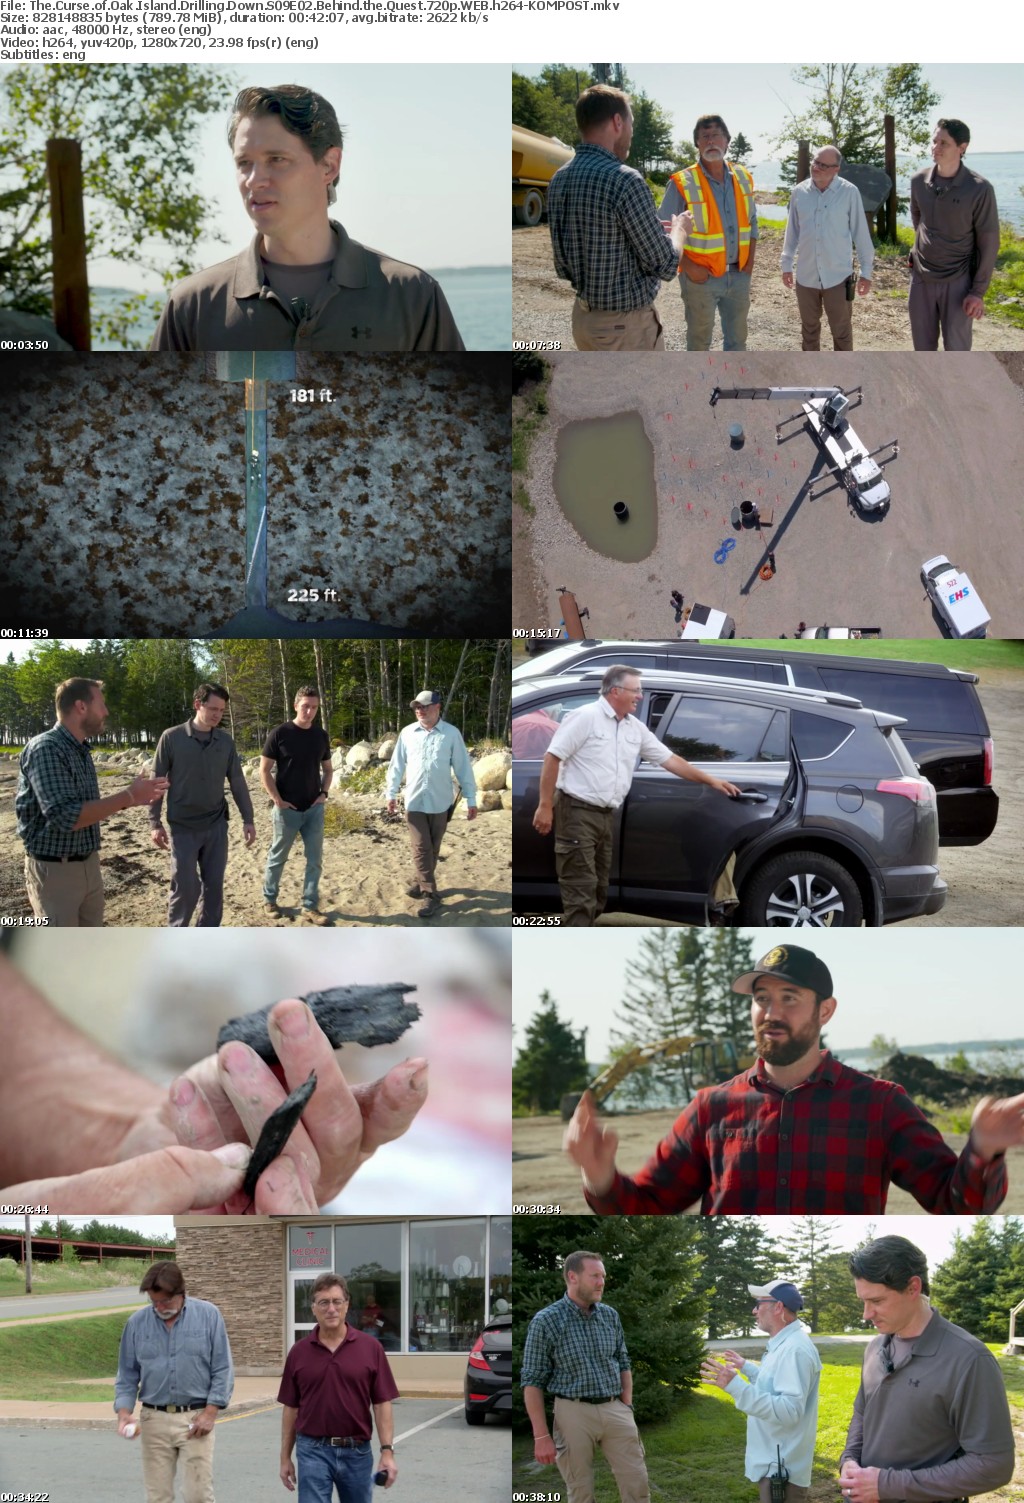 The Curse of Oak Island Drilling Down S09E02 Behind the Quest 720p WEB h264-KOMPOST